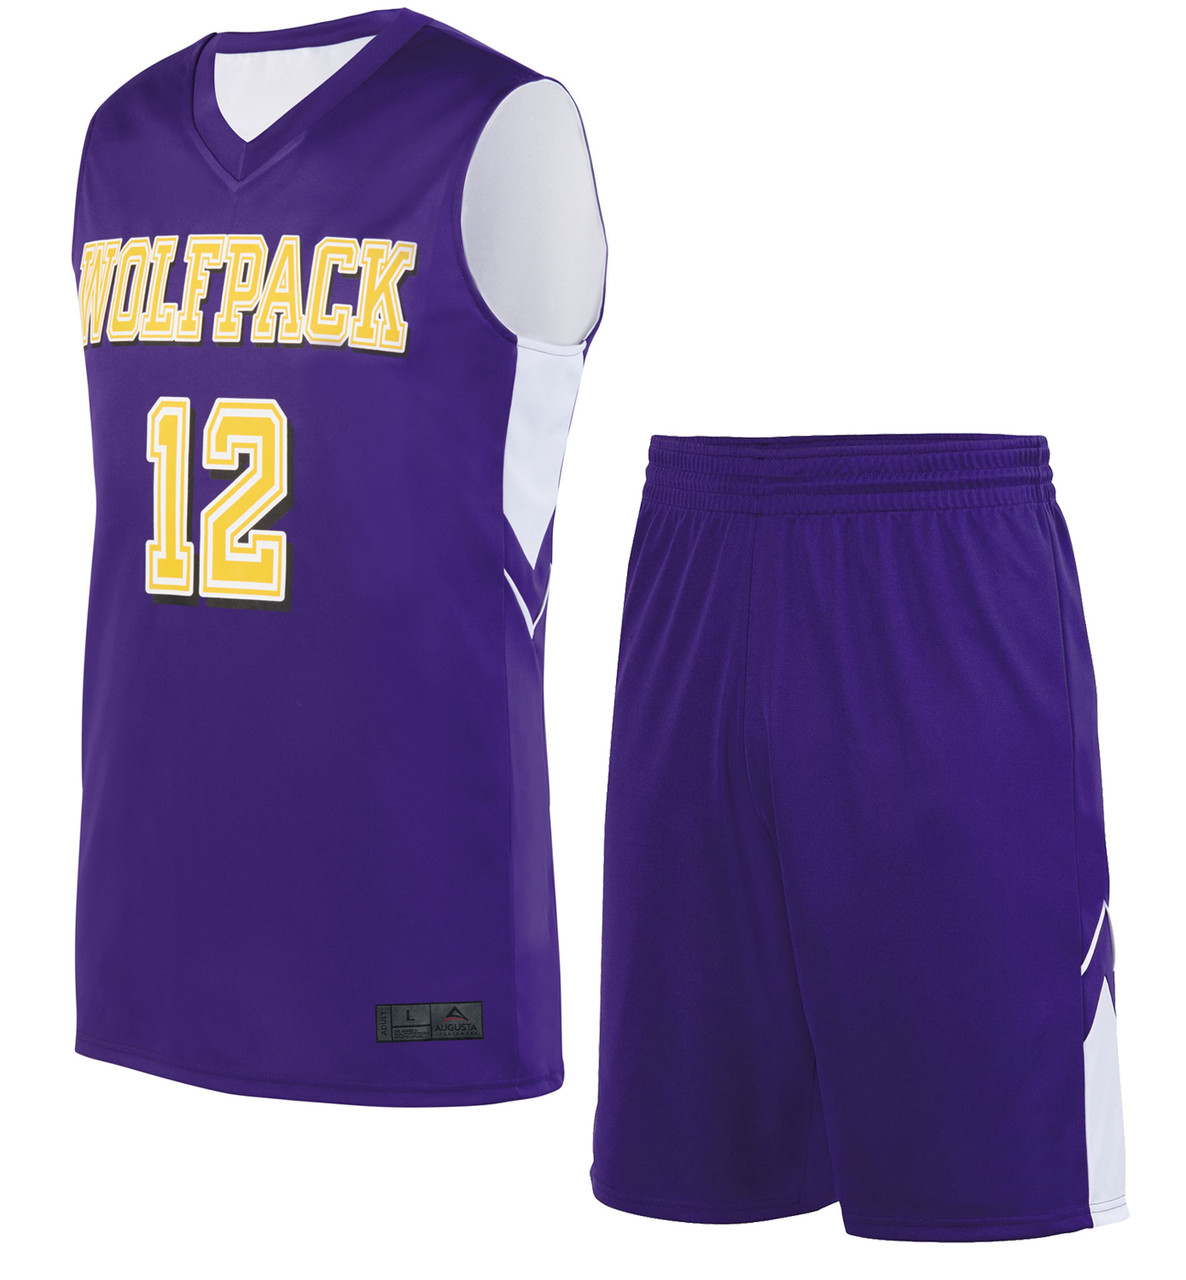 Reversible Basketball Uniforms - Youth & Adult